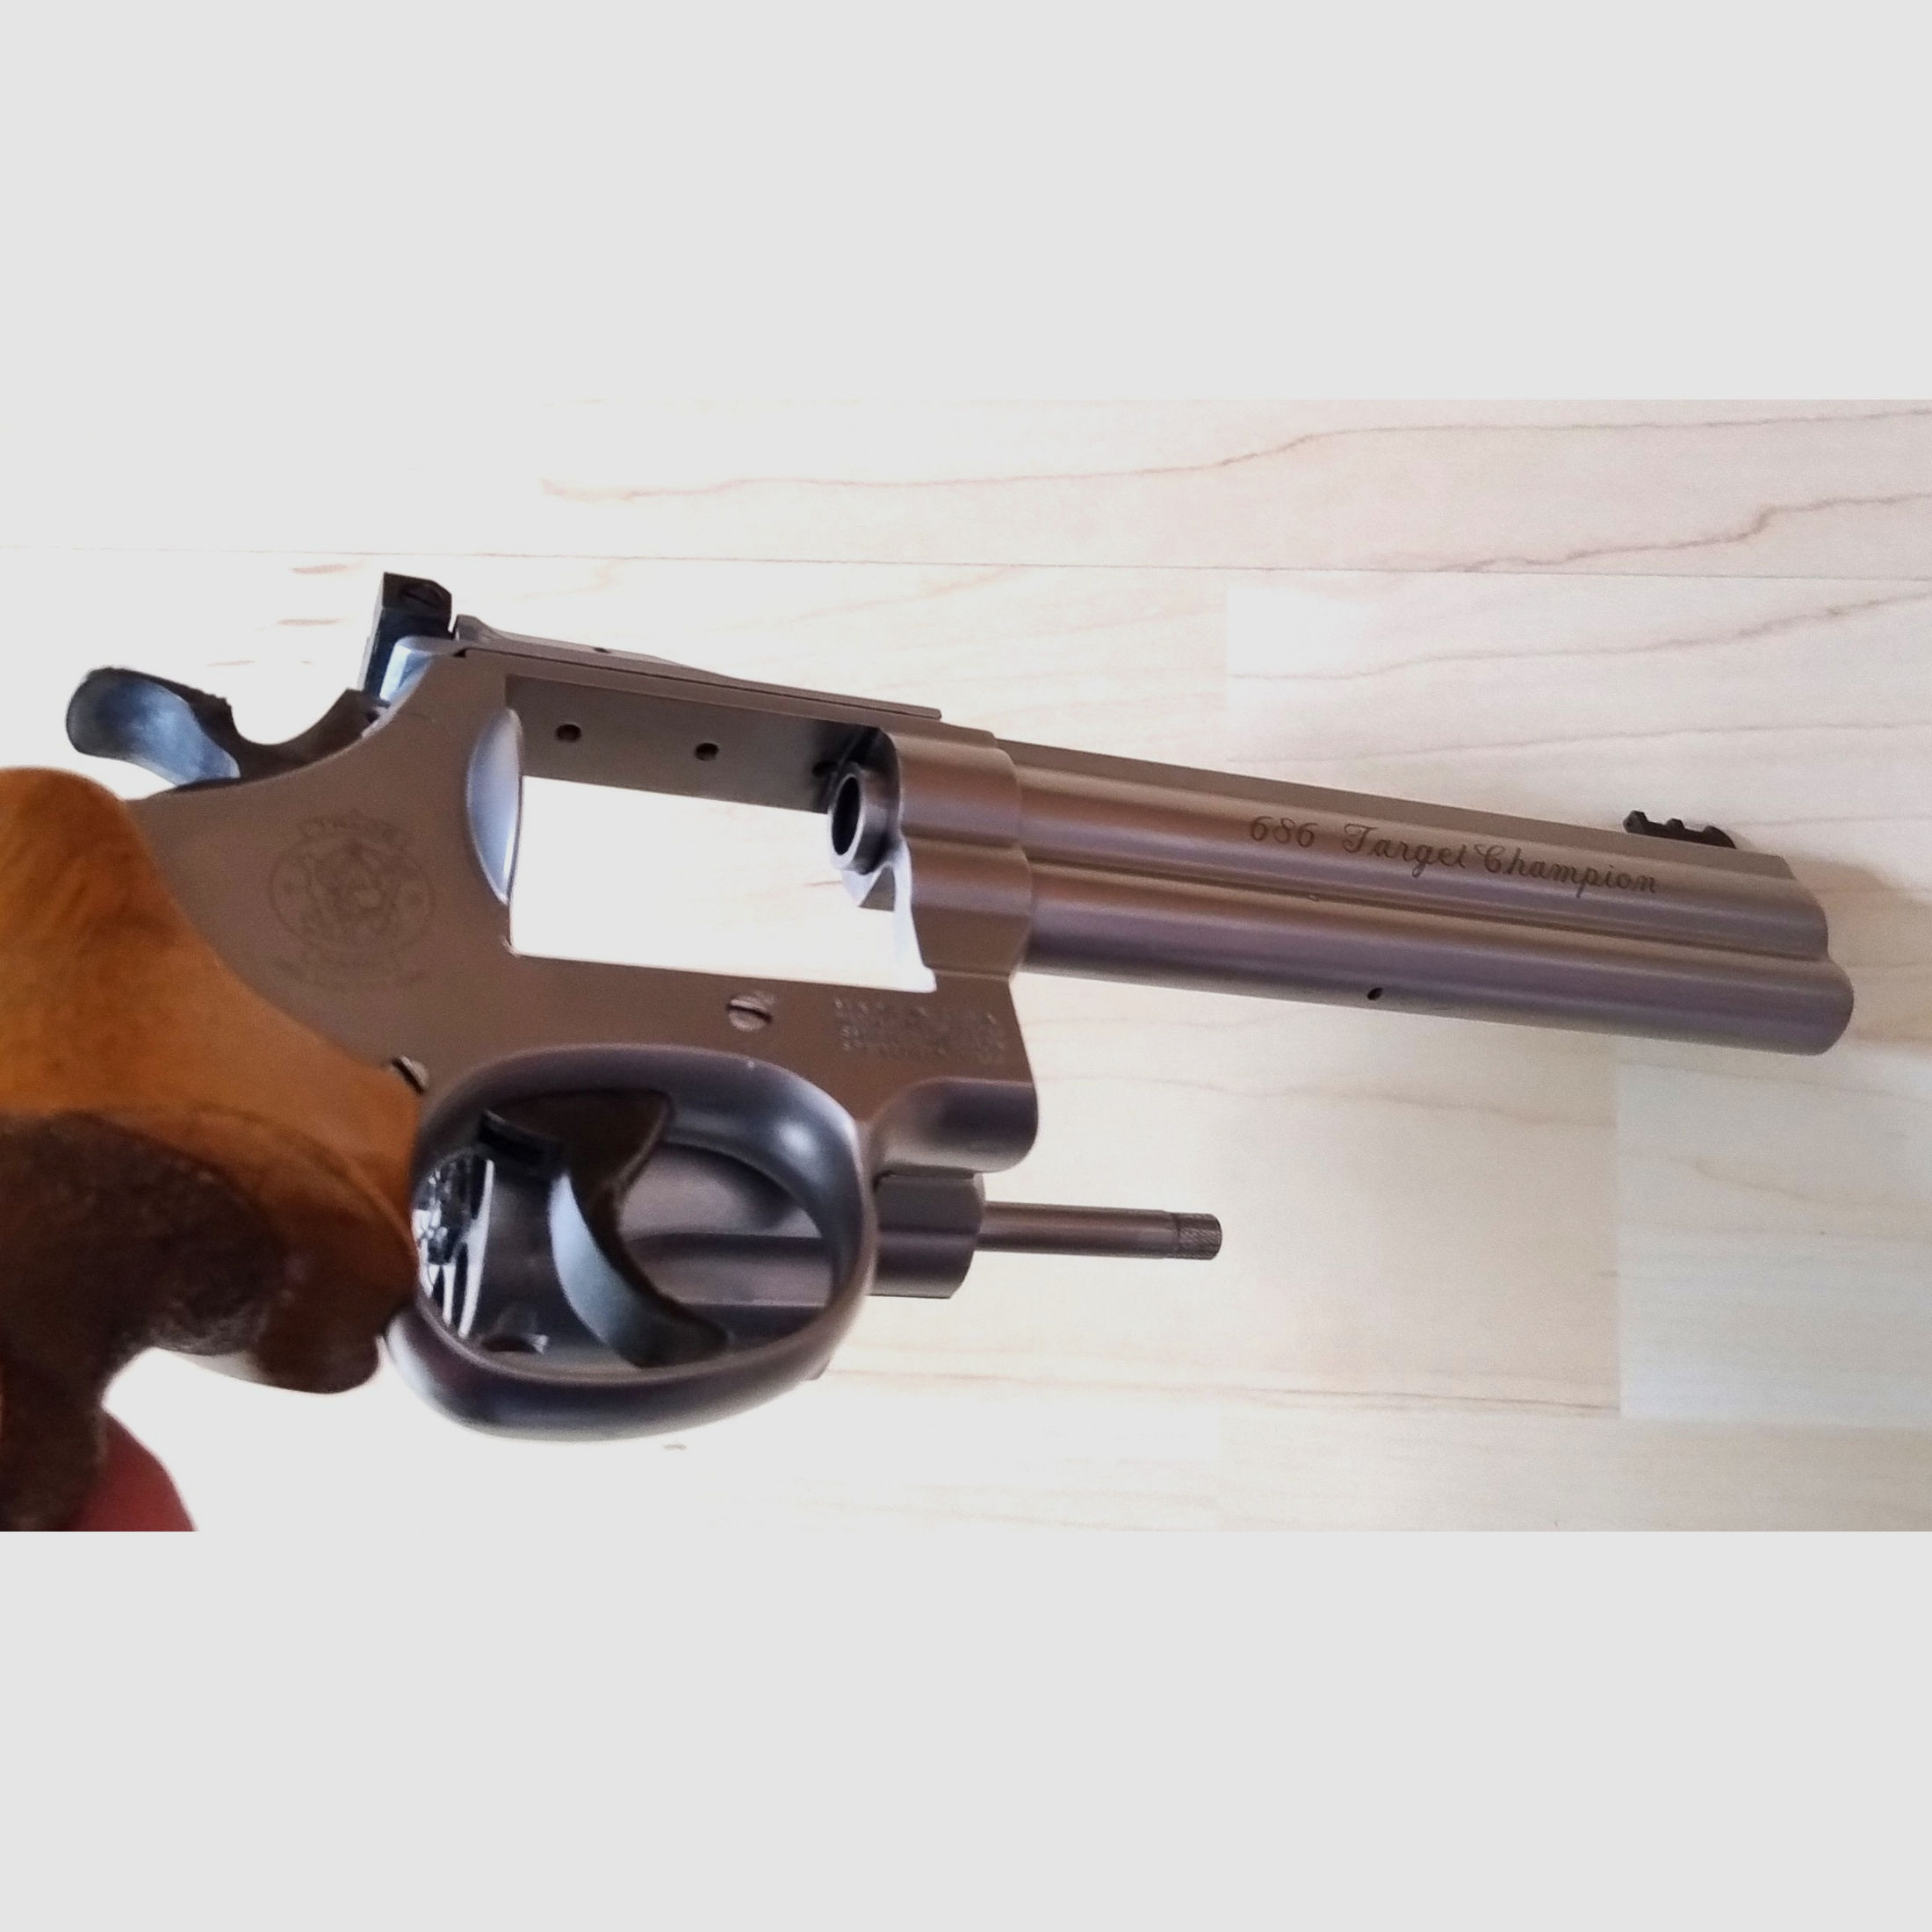 Revolver S&W 686 Target Champion Stainless